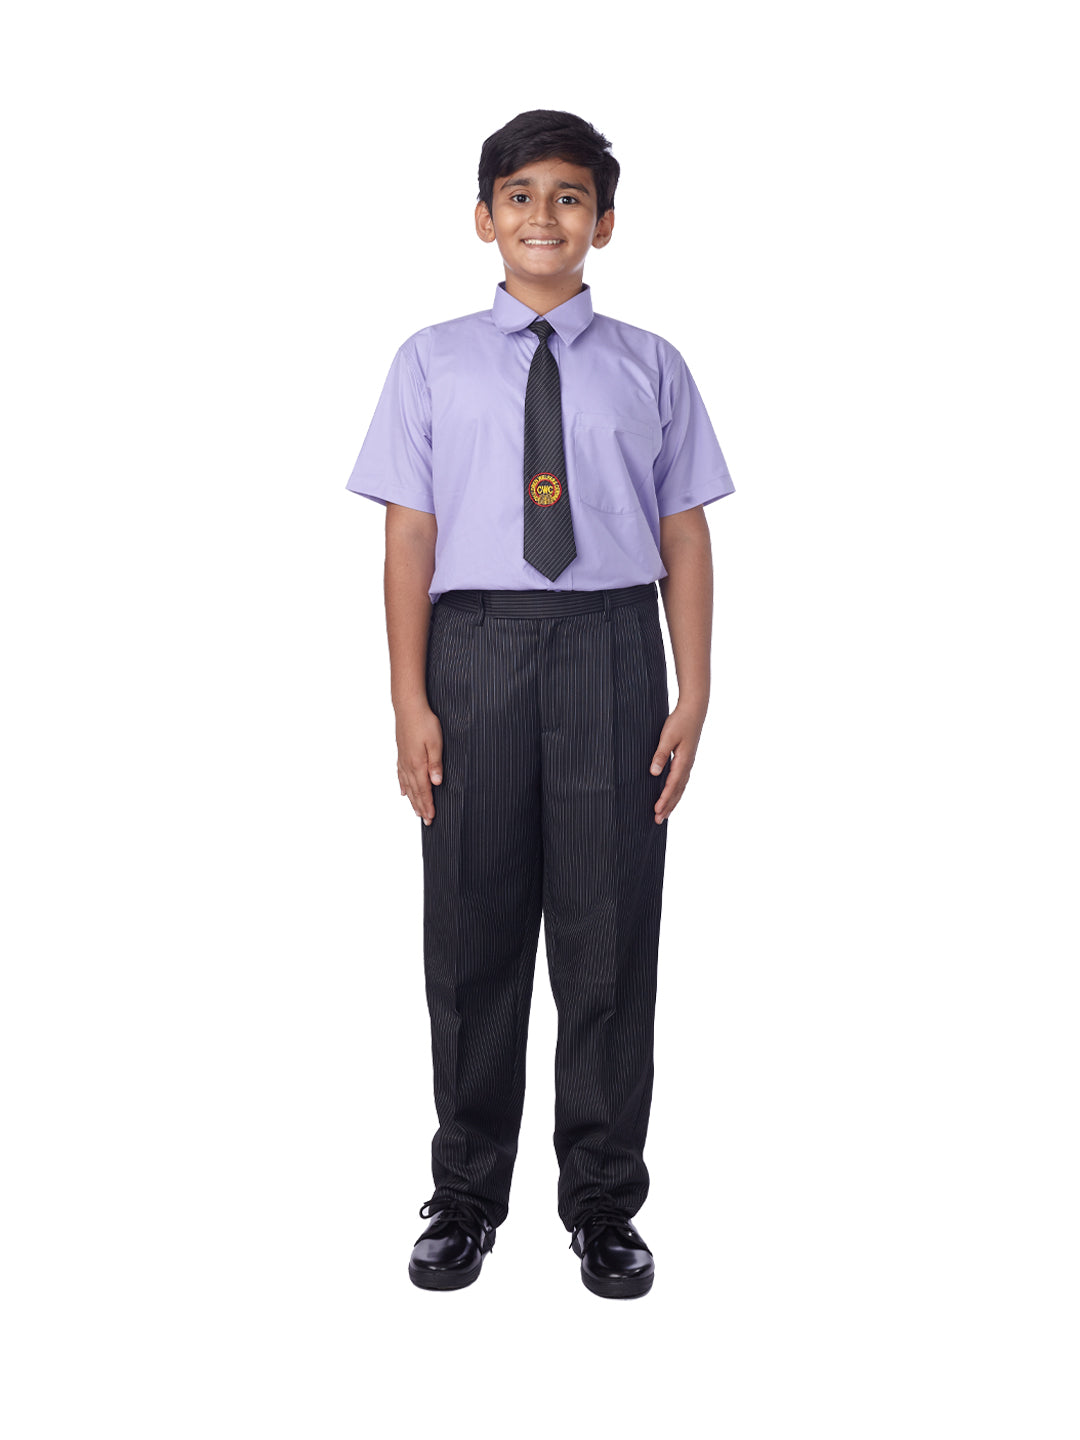 Buy K Uniform कैंची School Uniform Shirt for Boy's and Girl's | Colour -  Pink White | Size - 7 Year to 8 Year at Amazon.in